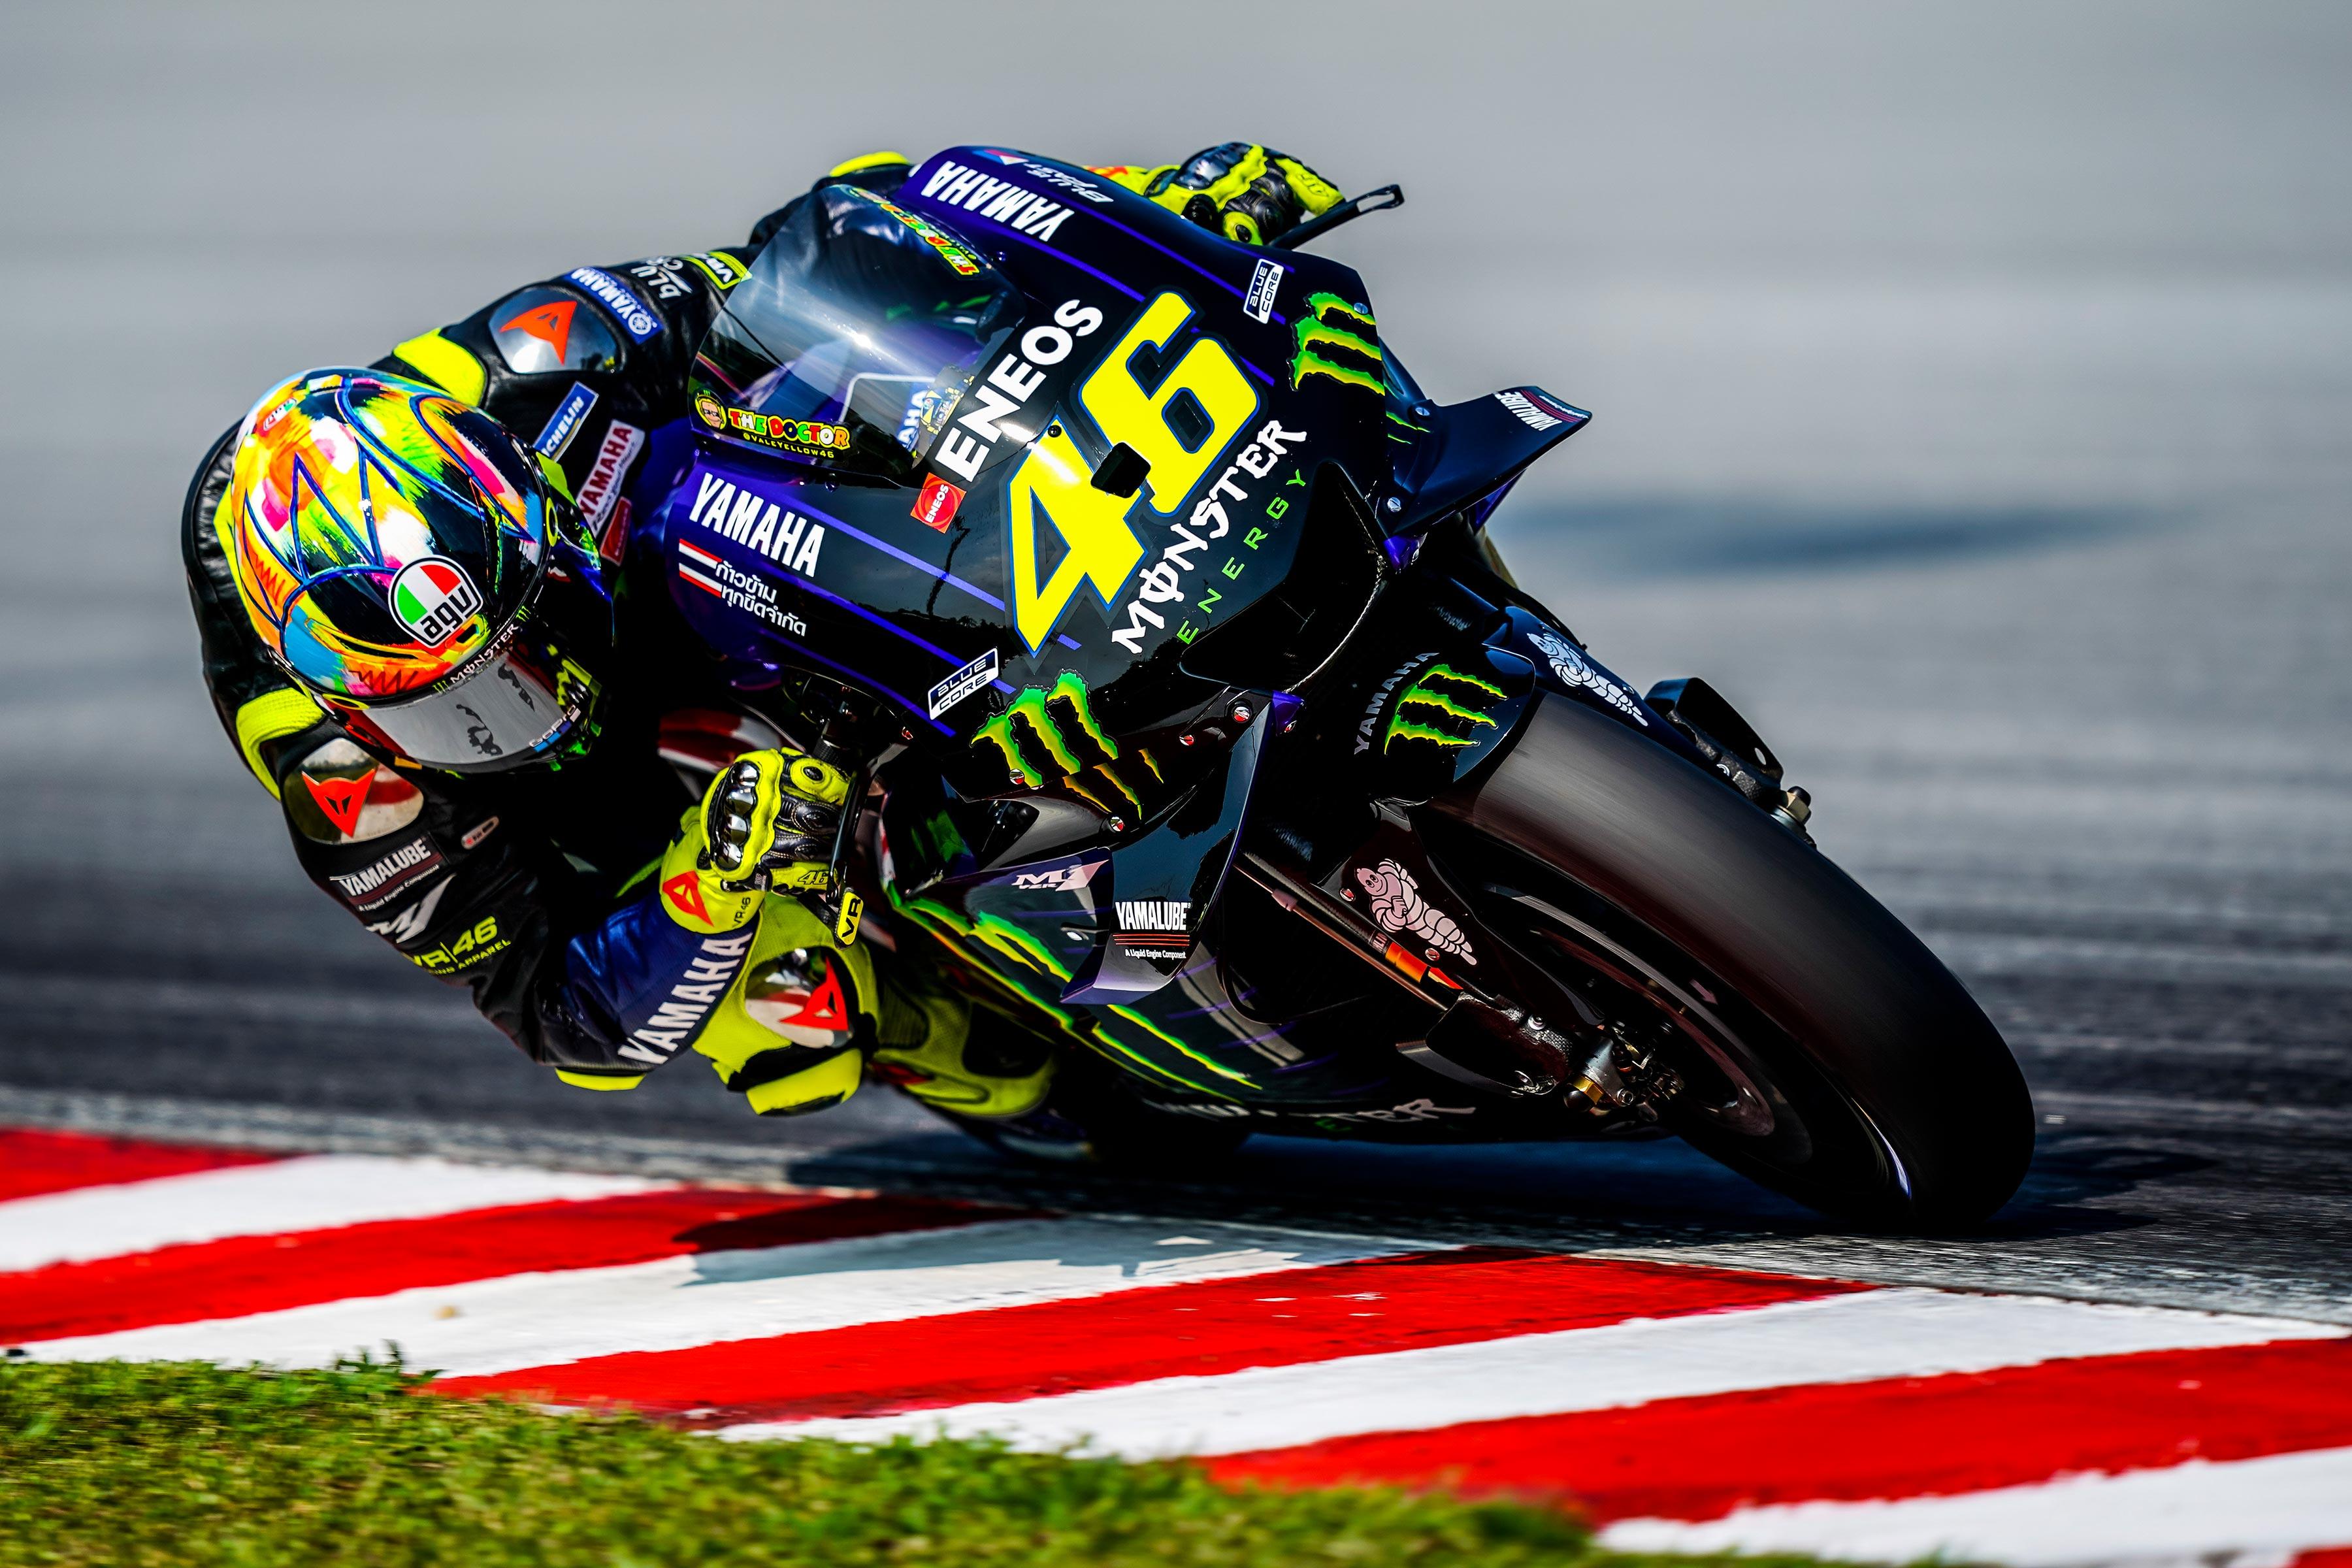 Rossi 4K wallpaper for your desktop or mobile screen free and easy to download